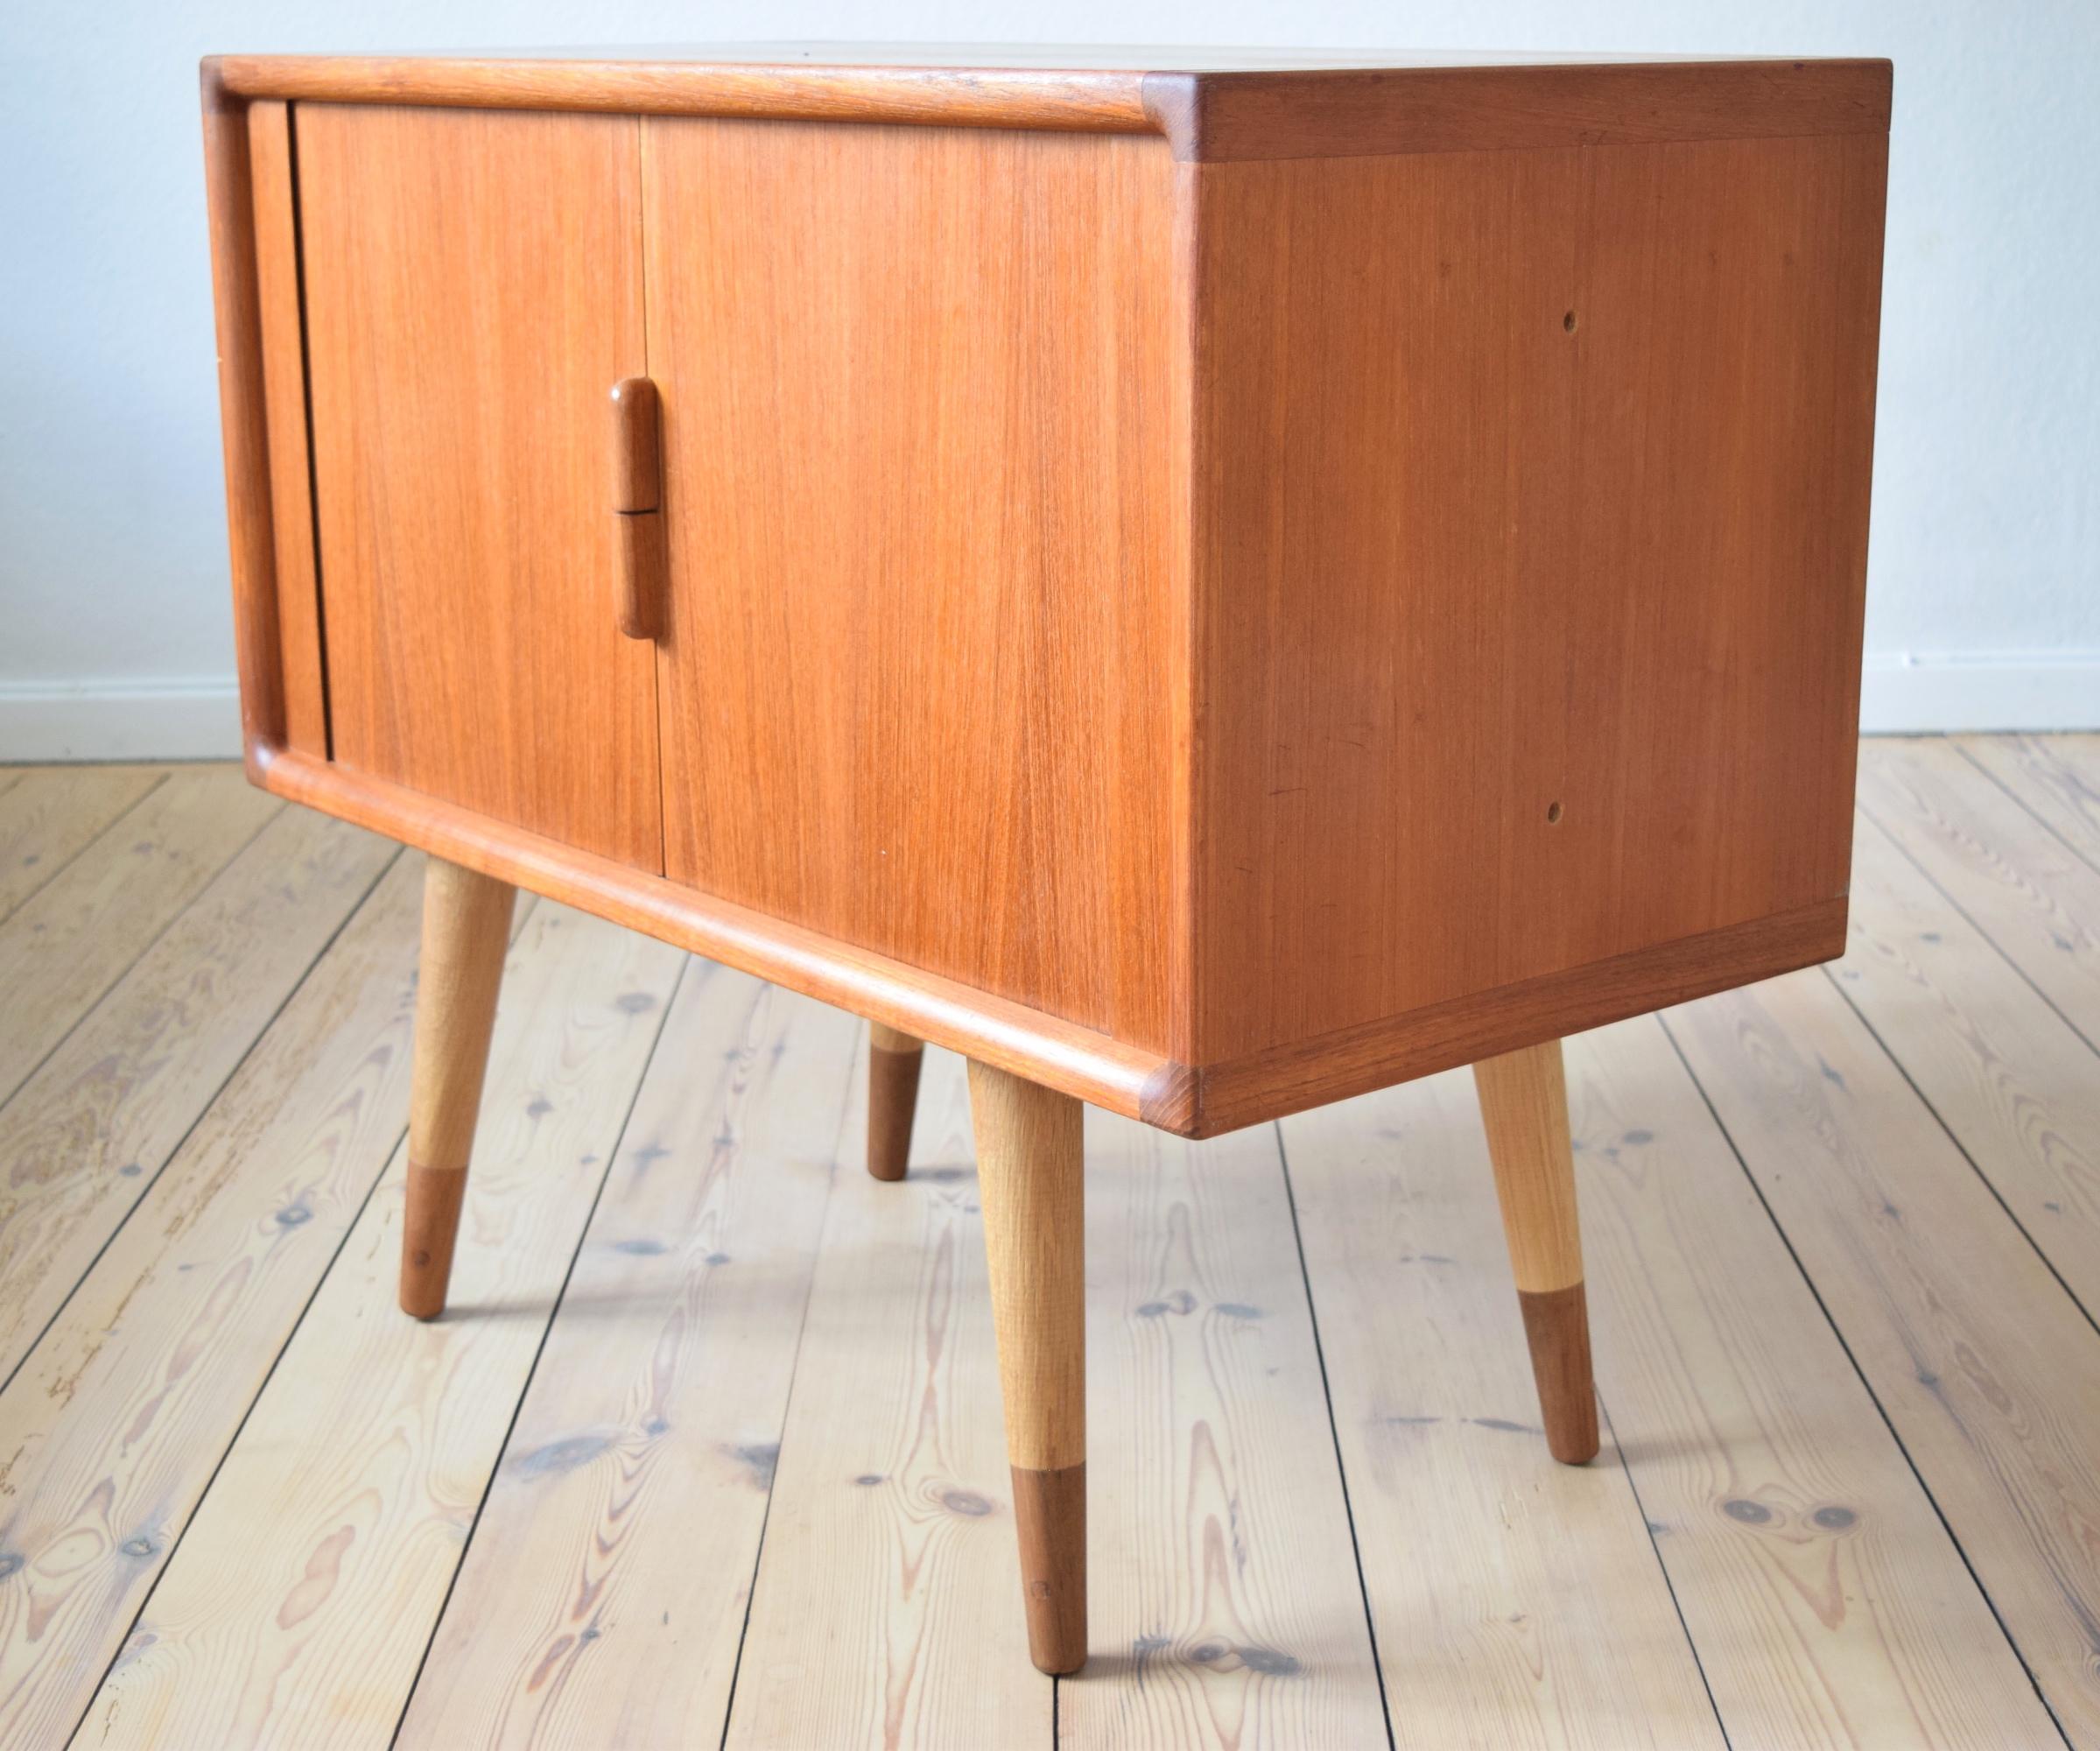 Teak cabinet with tambour doors manufactured in Denmark in the 1960s. This piece features internal shelf and teak sliding drawer. Bevelled edge all round. Originally sat on a plinth. Legs added at a later date using a combination of teak and oak.